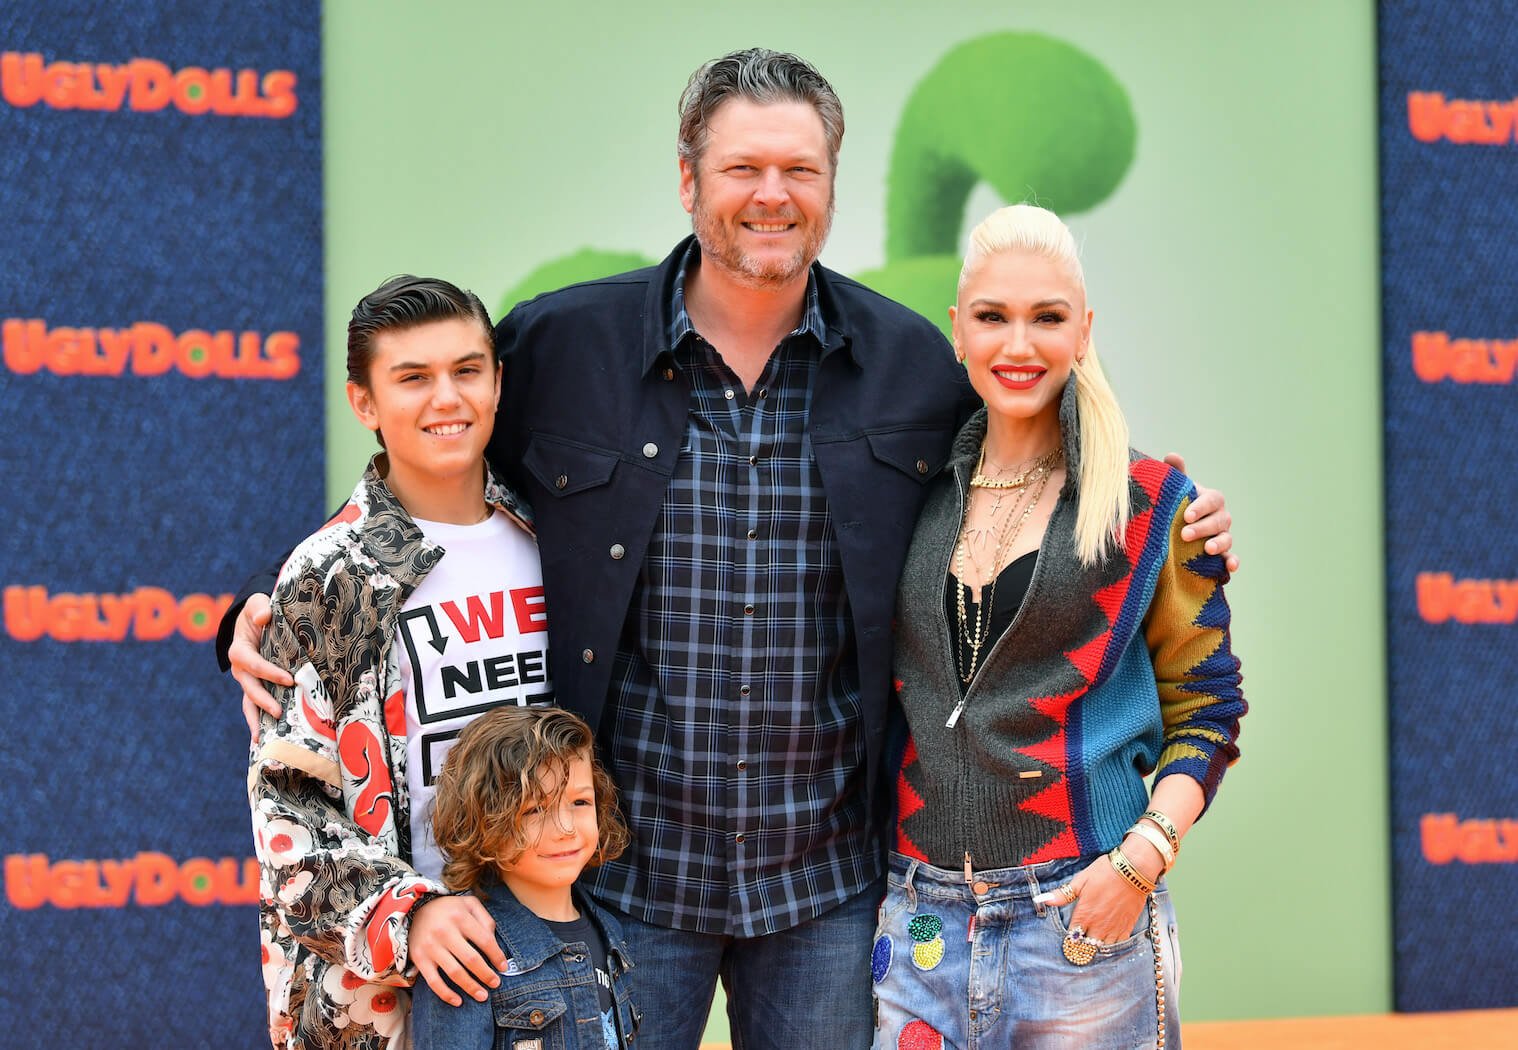 Gwen Stefani's 2 kids, Kingston and Apollo, standing with her and Blake Shelton for a photo